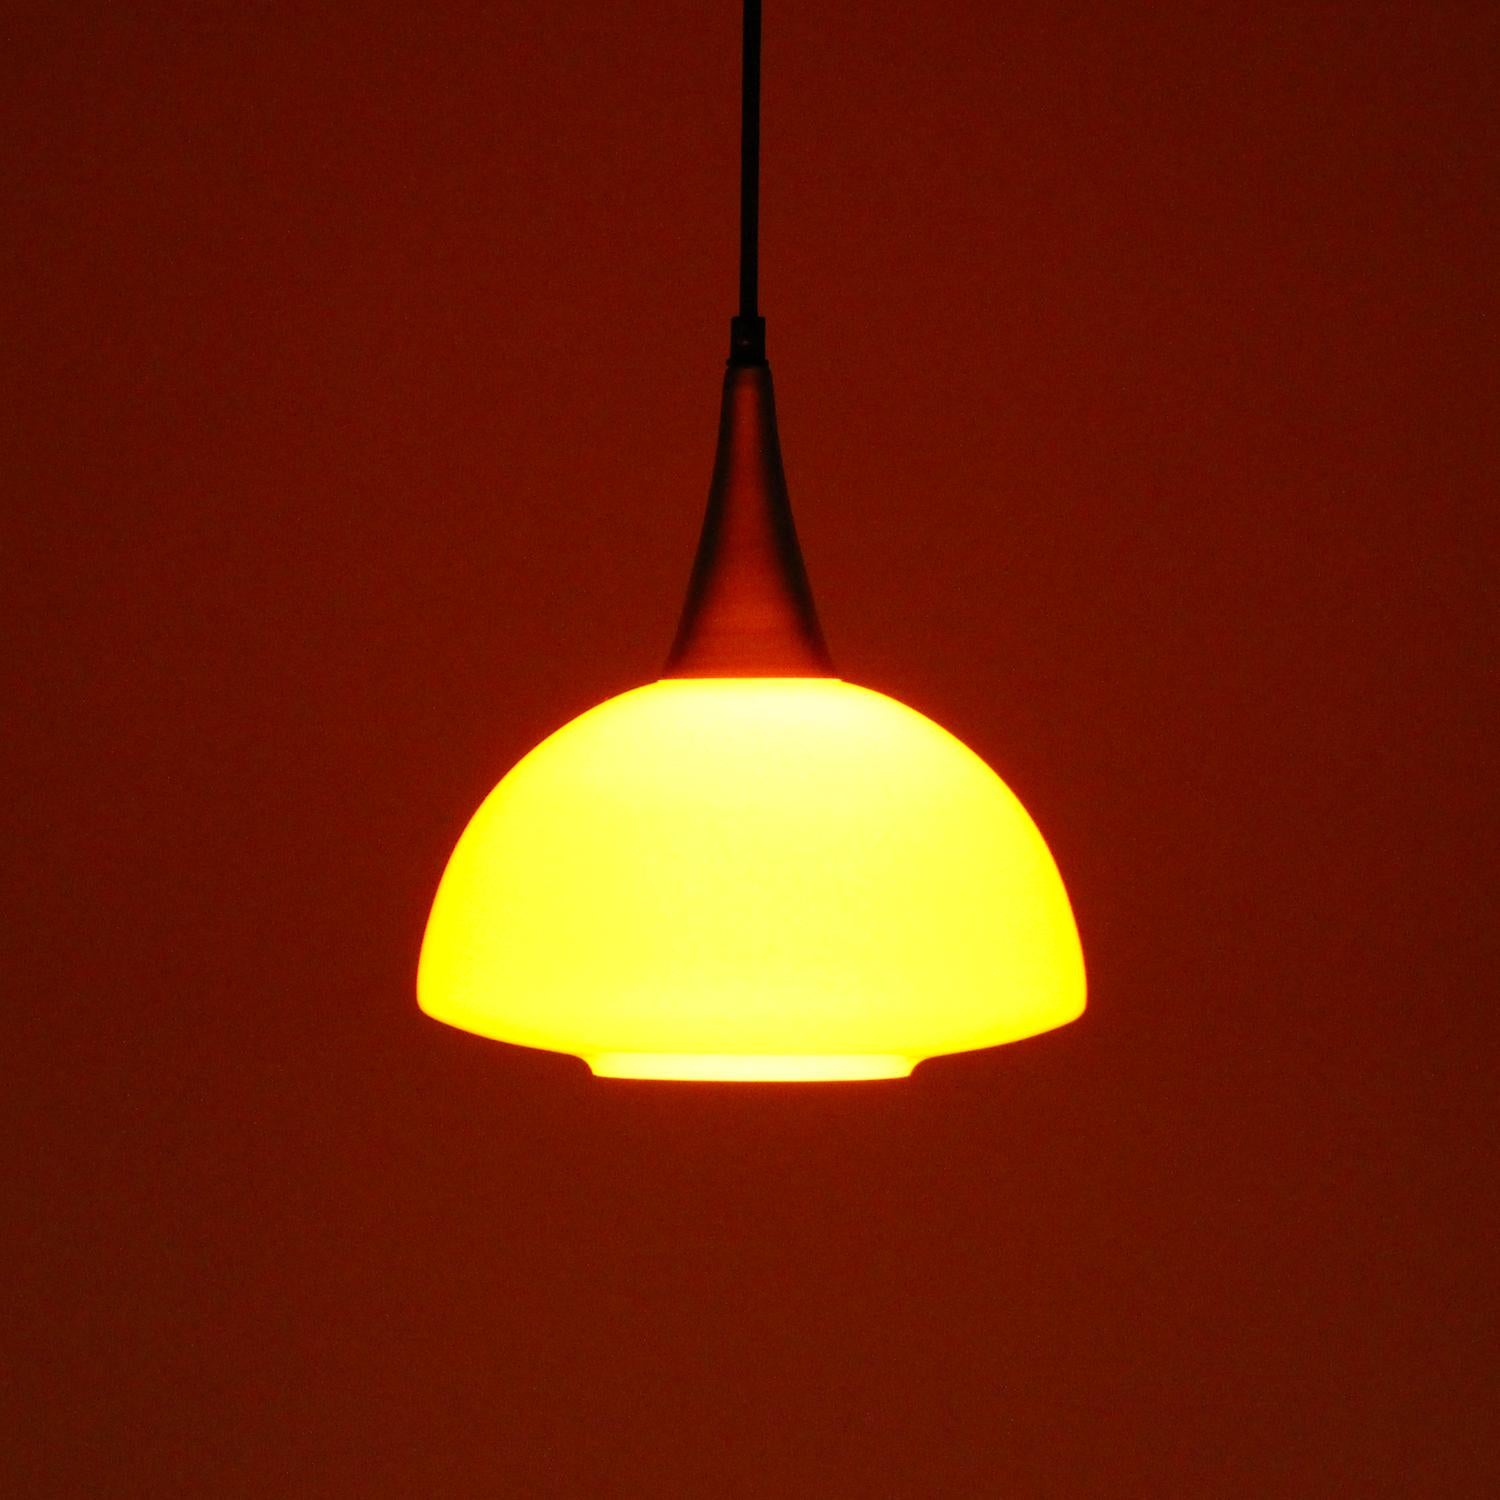 Orange glass pendant by Holmegaard (presumed) in the 1970s - Scandinavian Modern blown glass hanging light with brass lacquered top, in very good vintage condition.

This charming blown glass pendant is comprised of a two-layer blown glass shade,